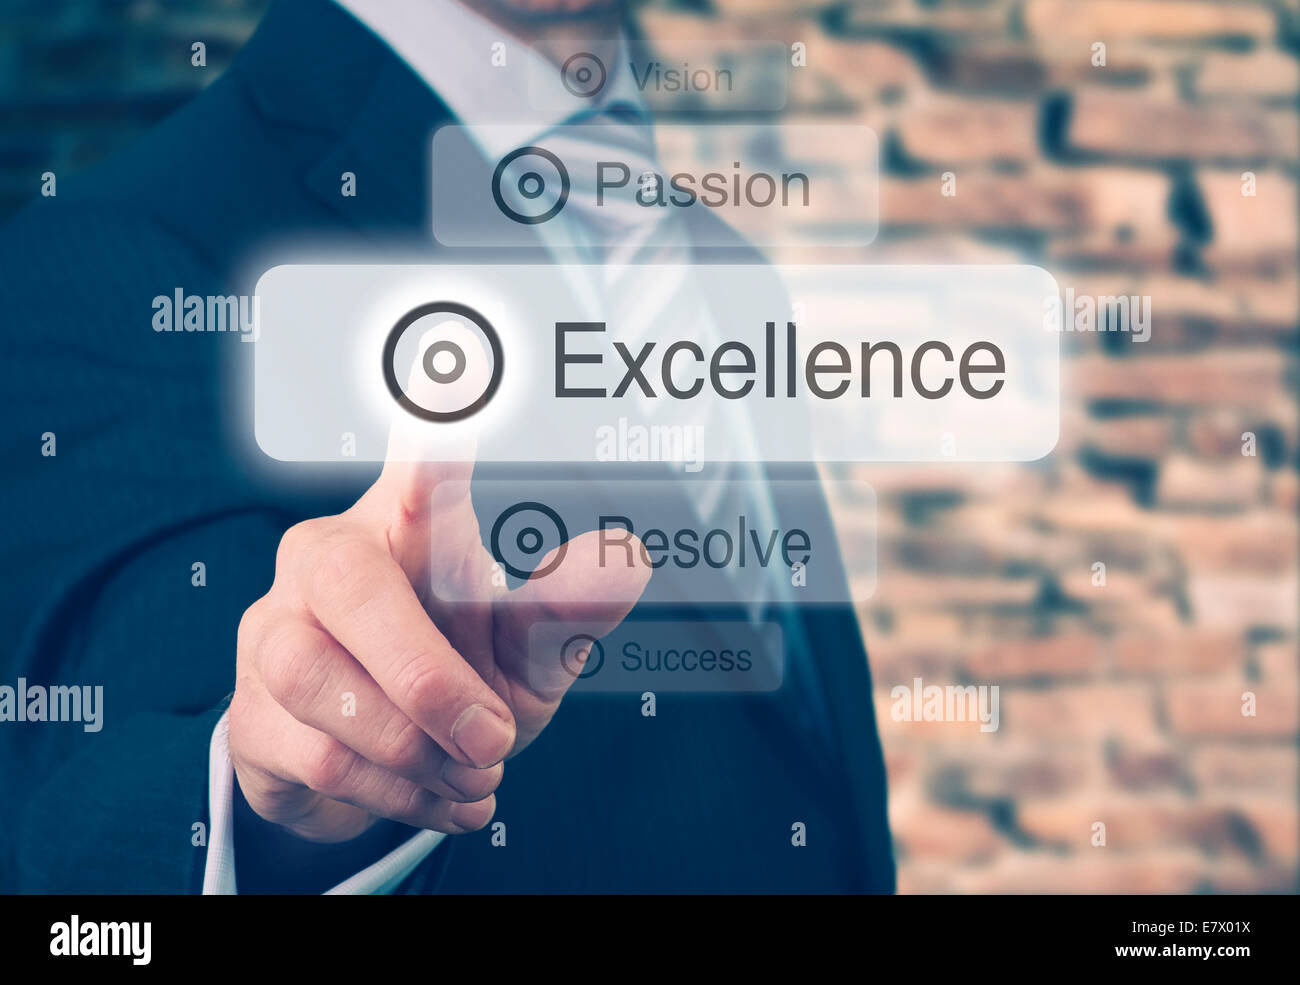 Businessman pressing a Excellence concept button. Instagram Styling Applied. Stock Photo